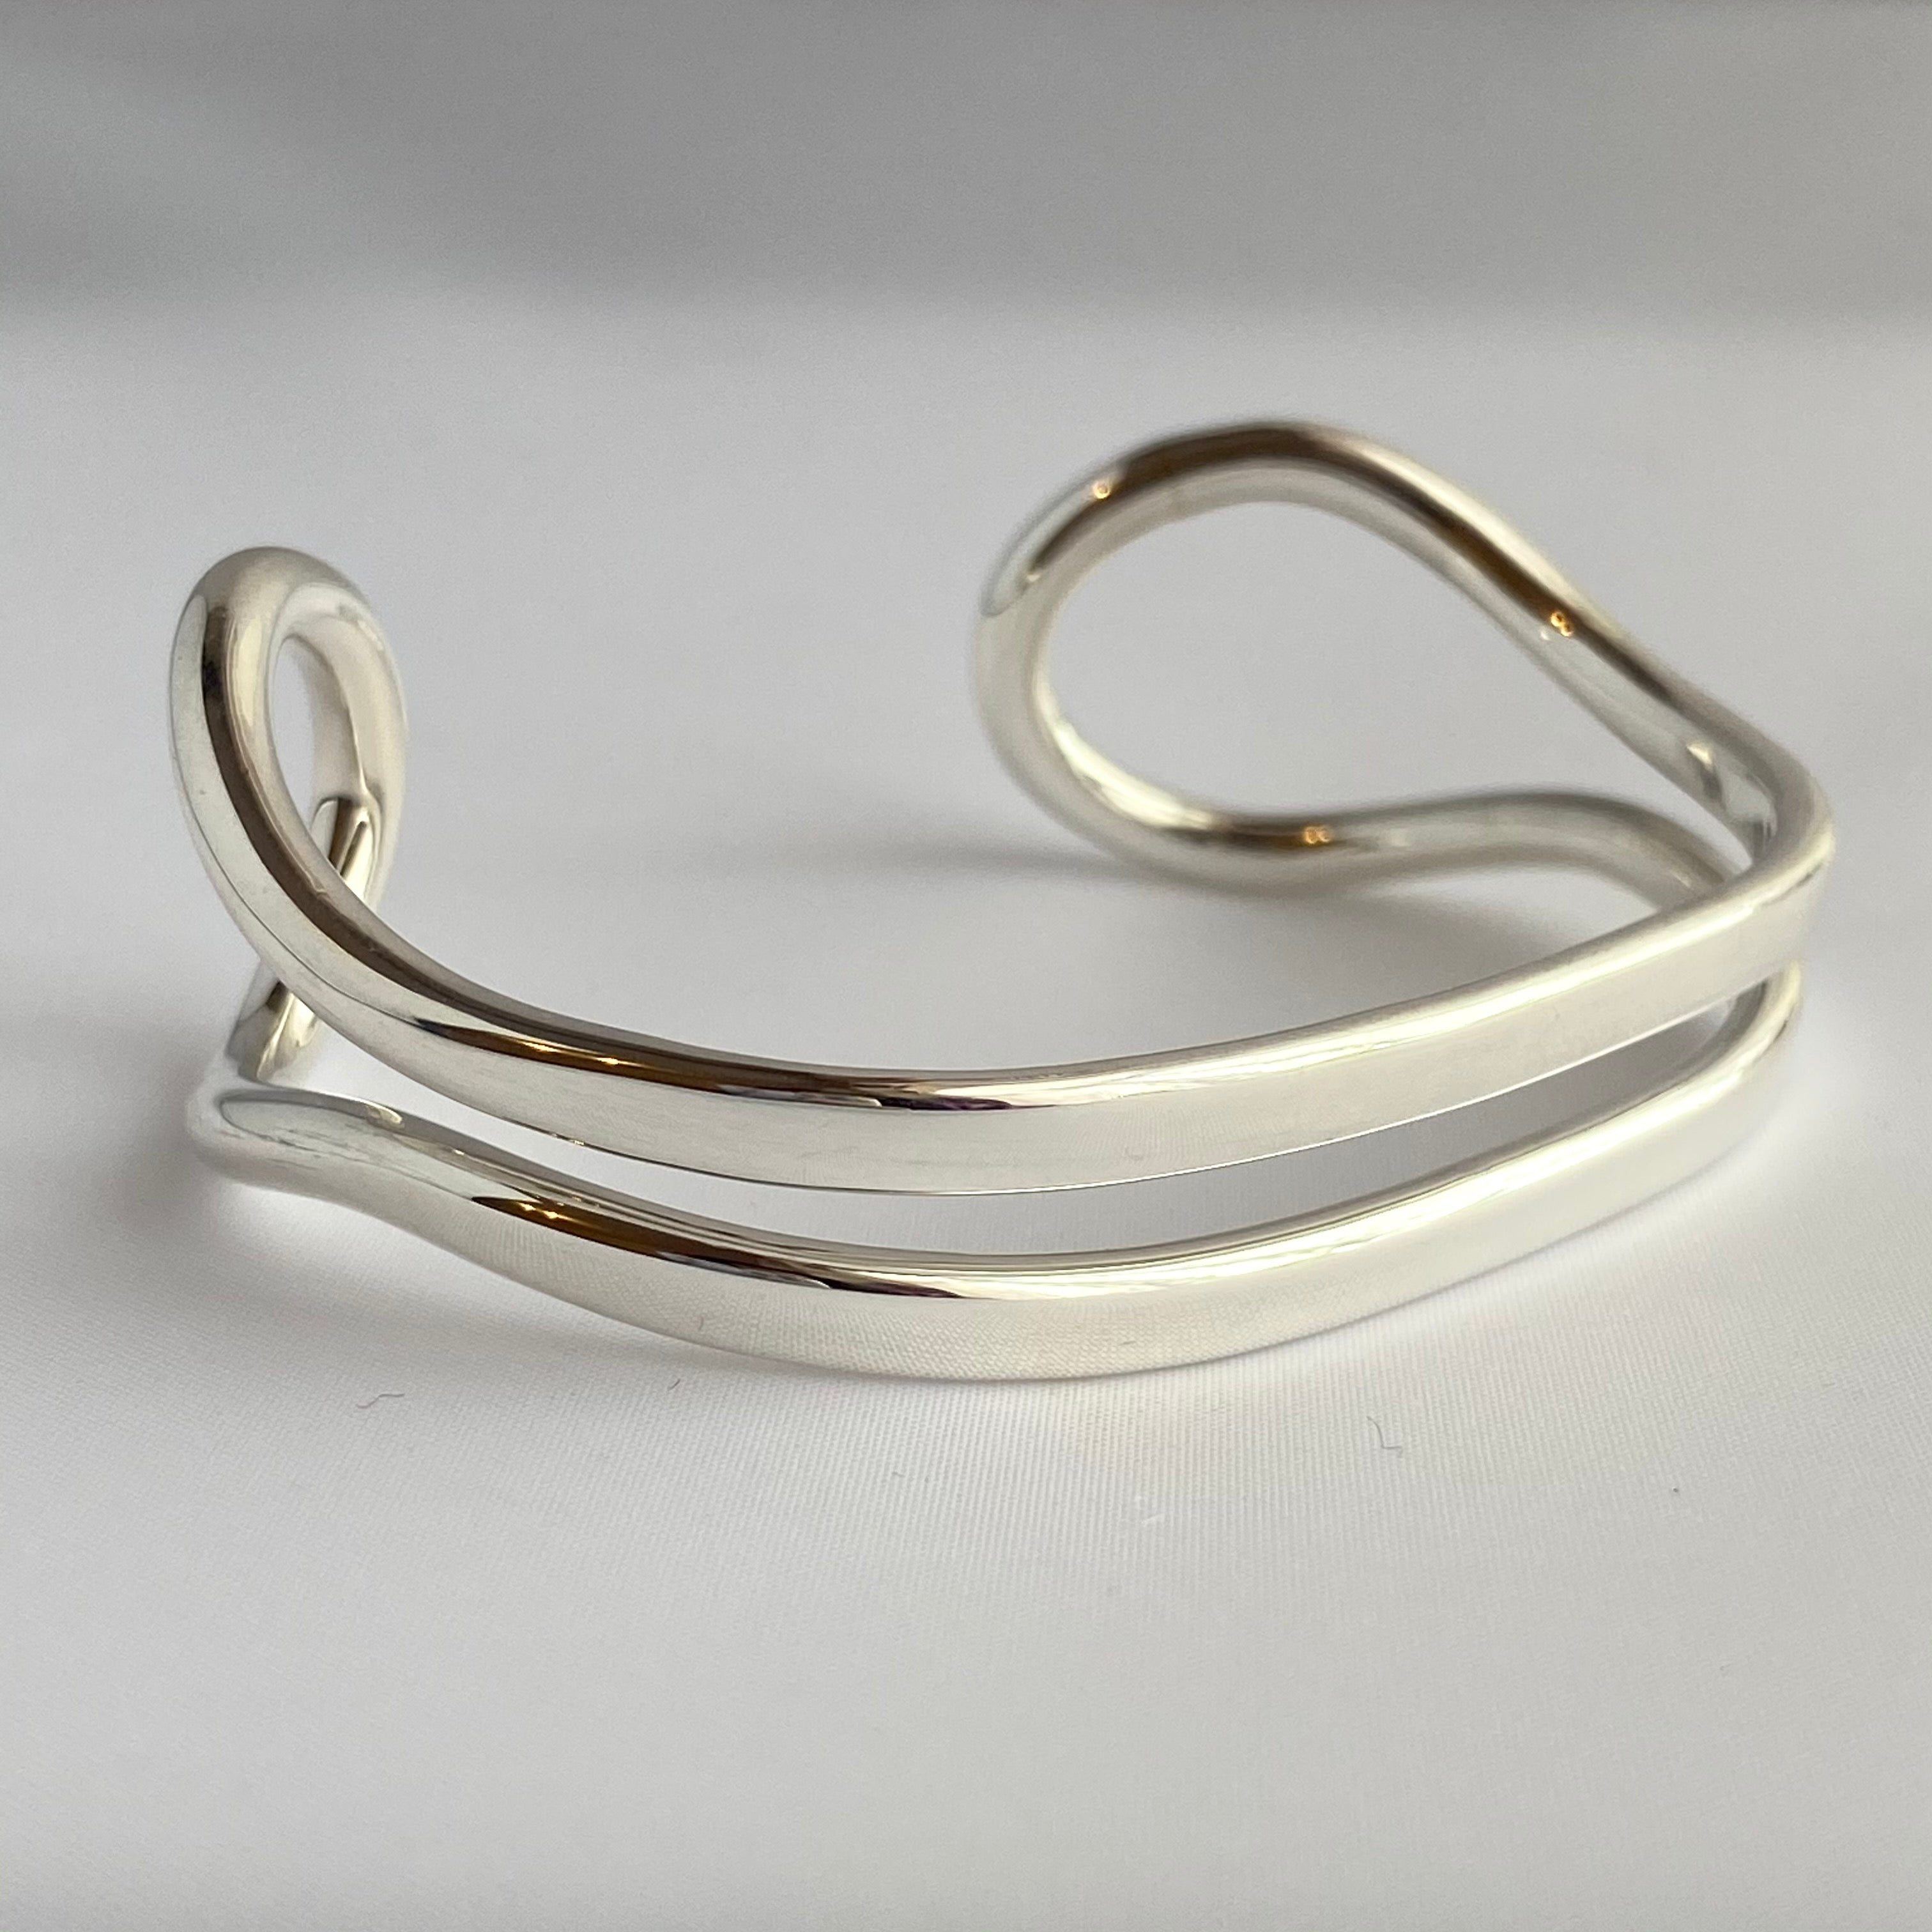 Sterling Silver Cuff with Two Flat Curving Silver Bands